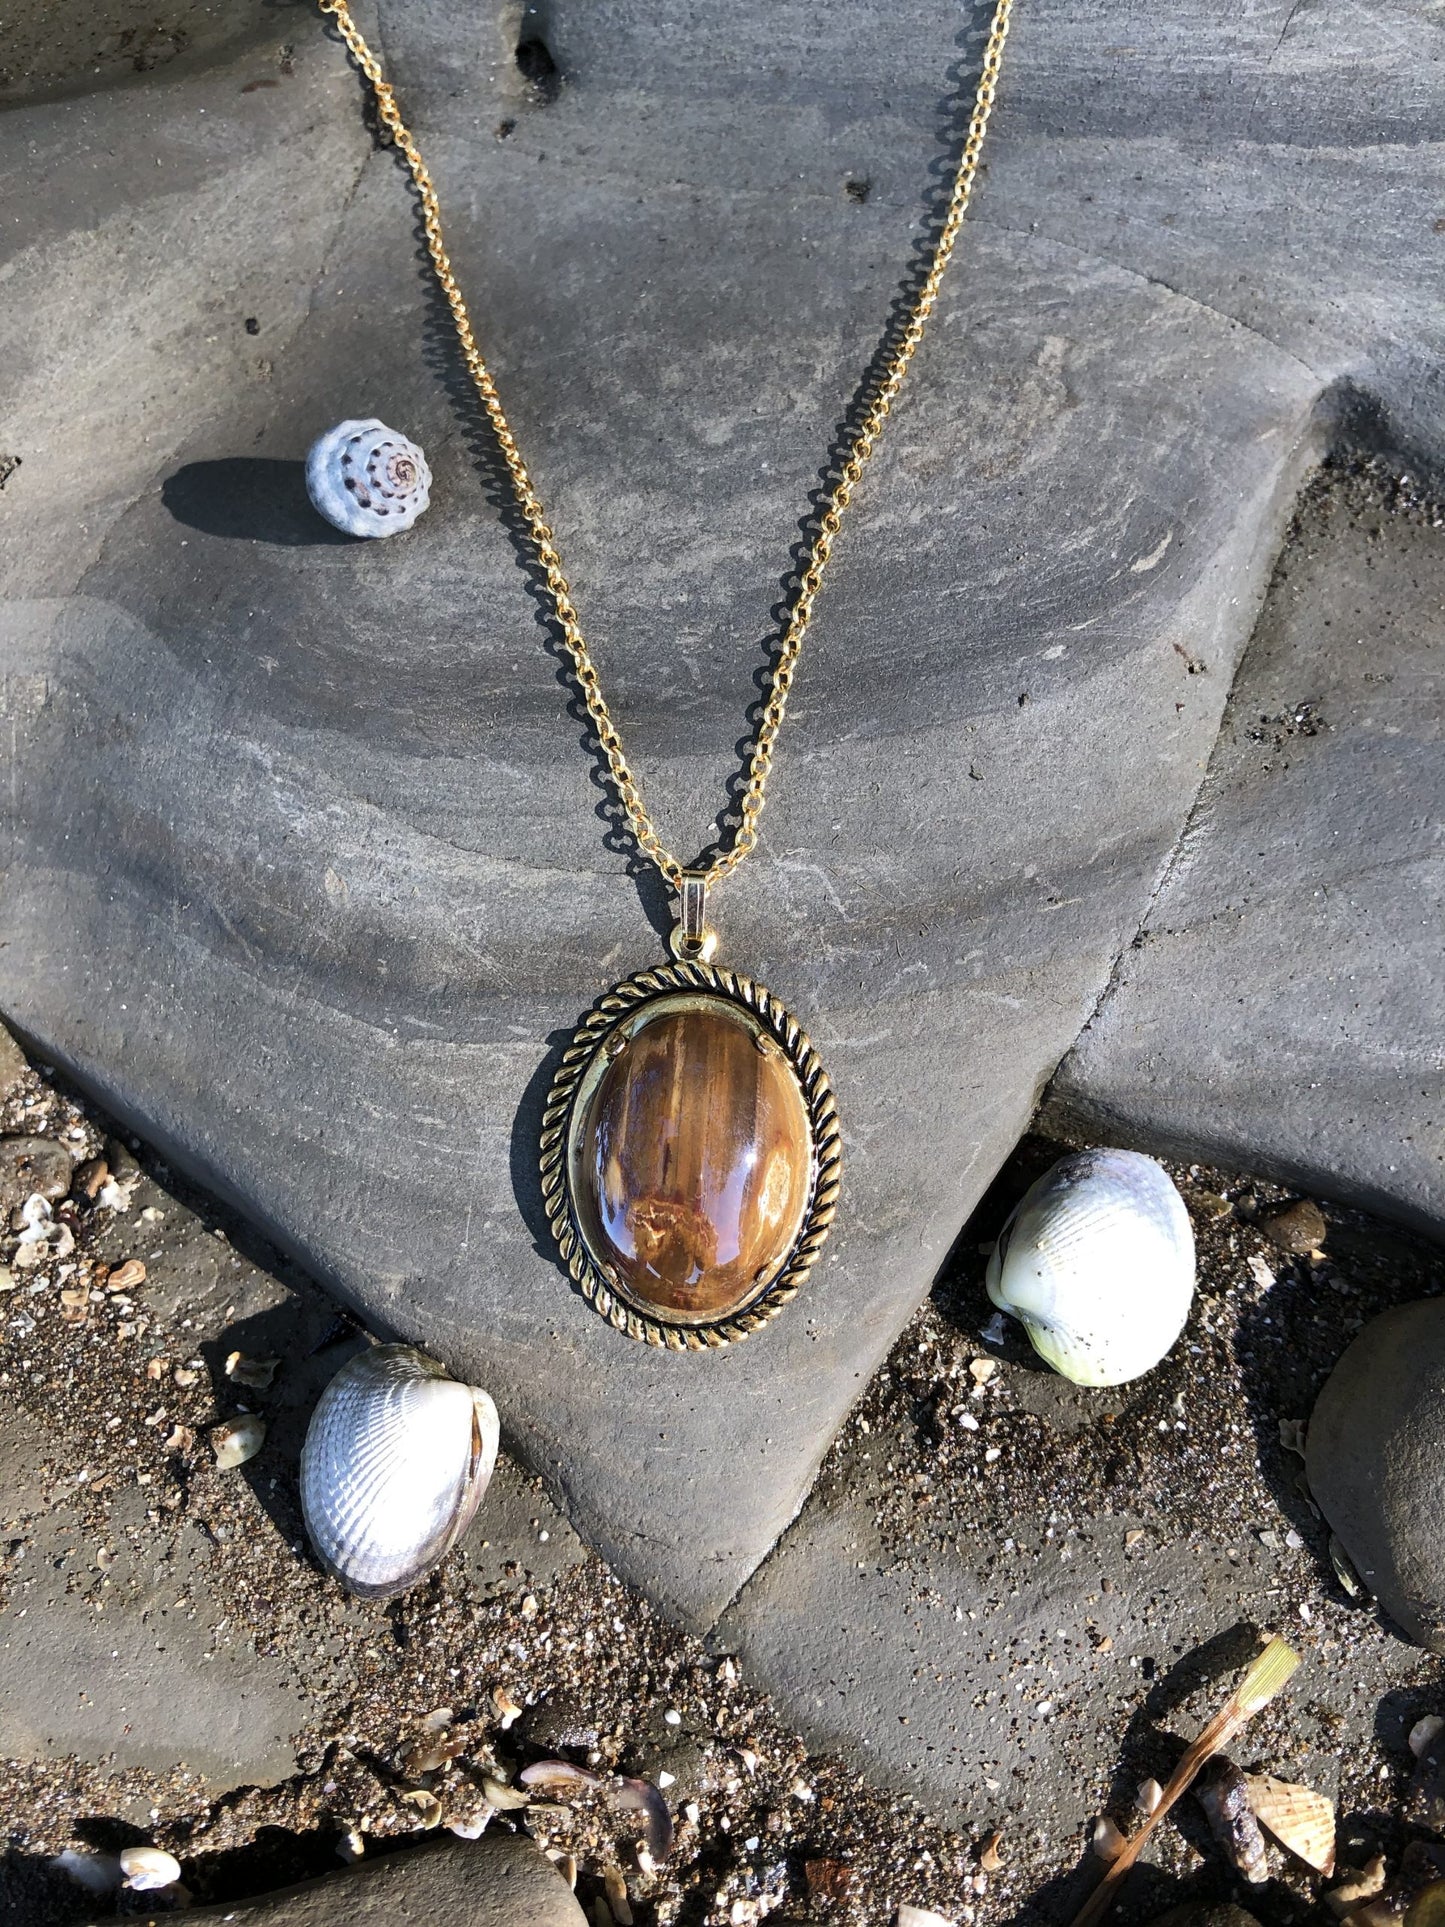 Necklace with Australian petrified wood showing beautiful grain patterns in lovely wood-tones of brown and tan, hand polished to a 25x18mm cabochon and set in a gold plated setting with 19 inch chain, distant